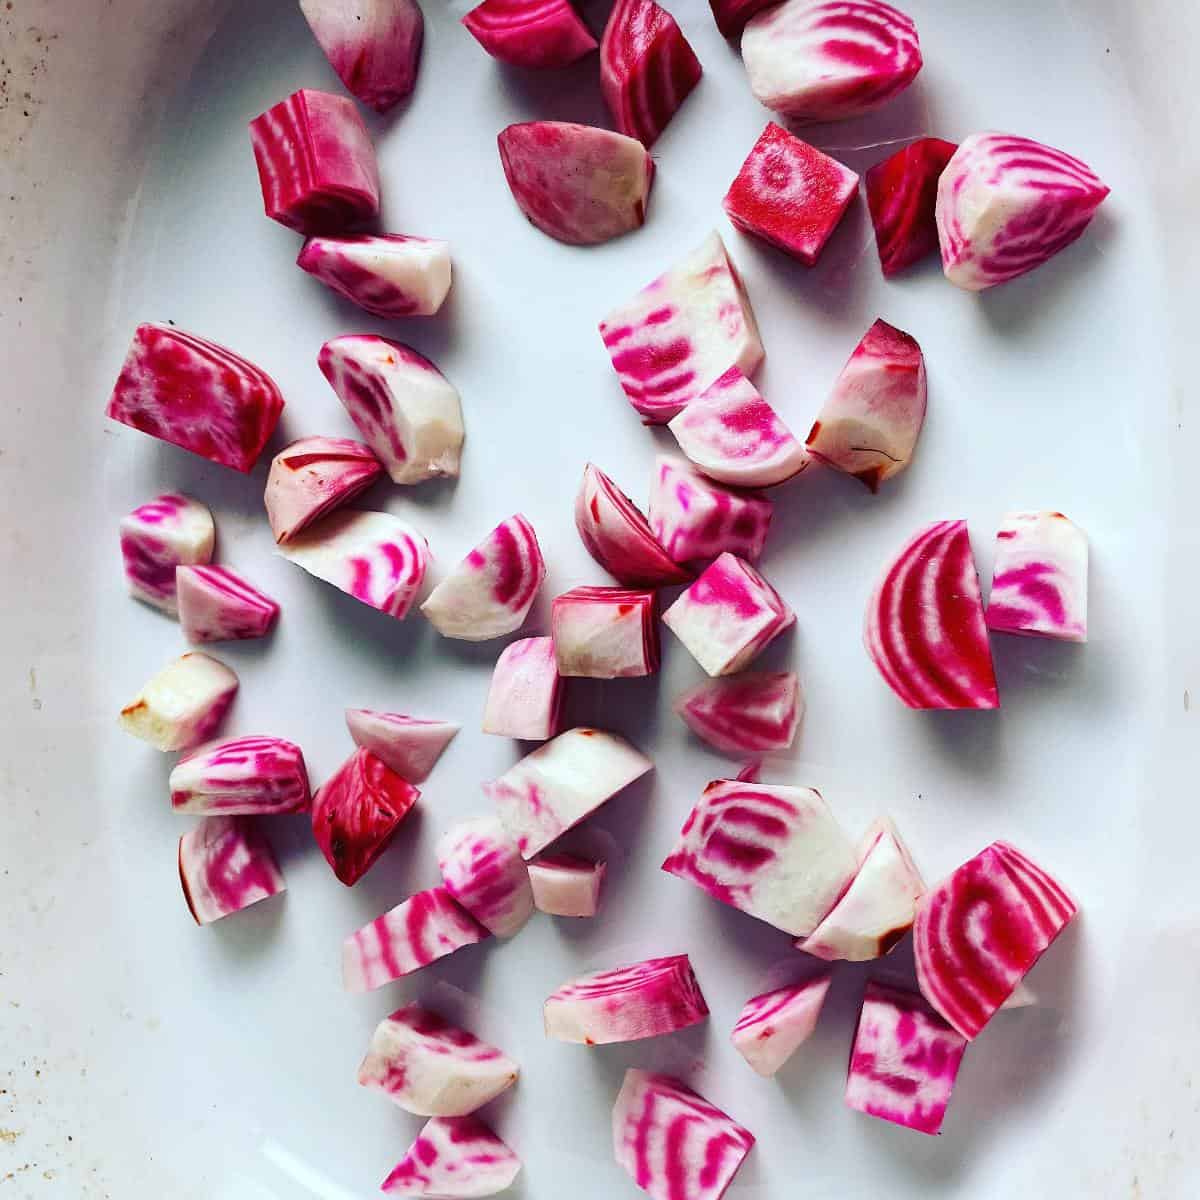 Chopped chioggia beets, with red and white stripes, in a white roasting pan.